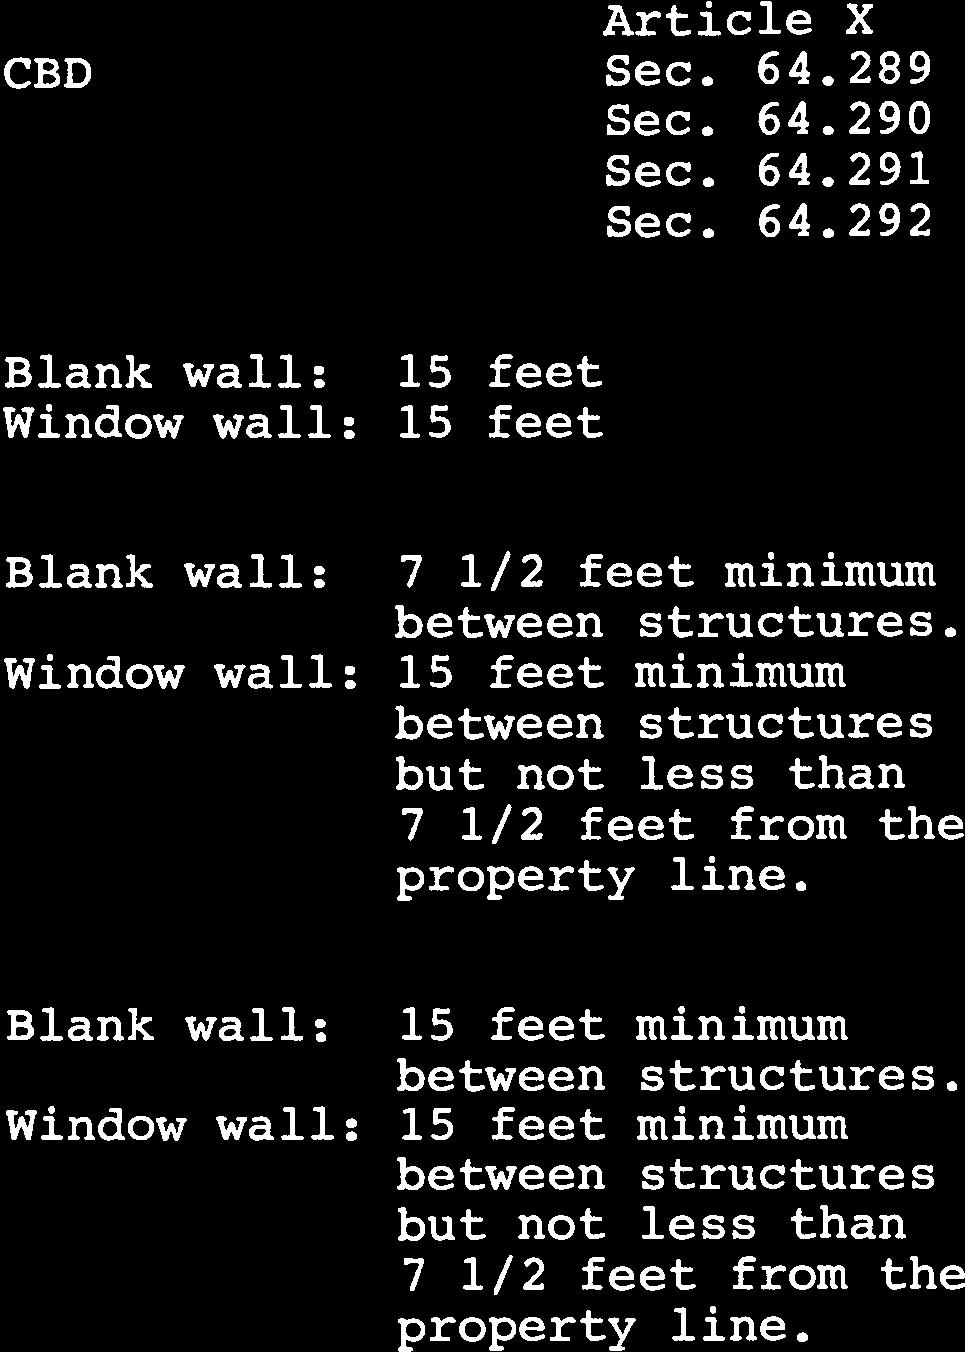 Window wall: 15 minimum between structures but not less than 7 1/2 from the property line. Window wall setback off line.